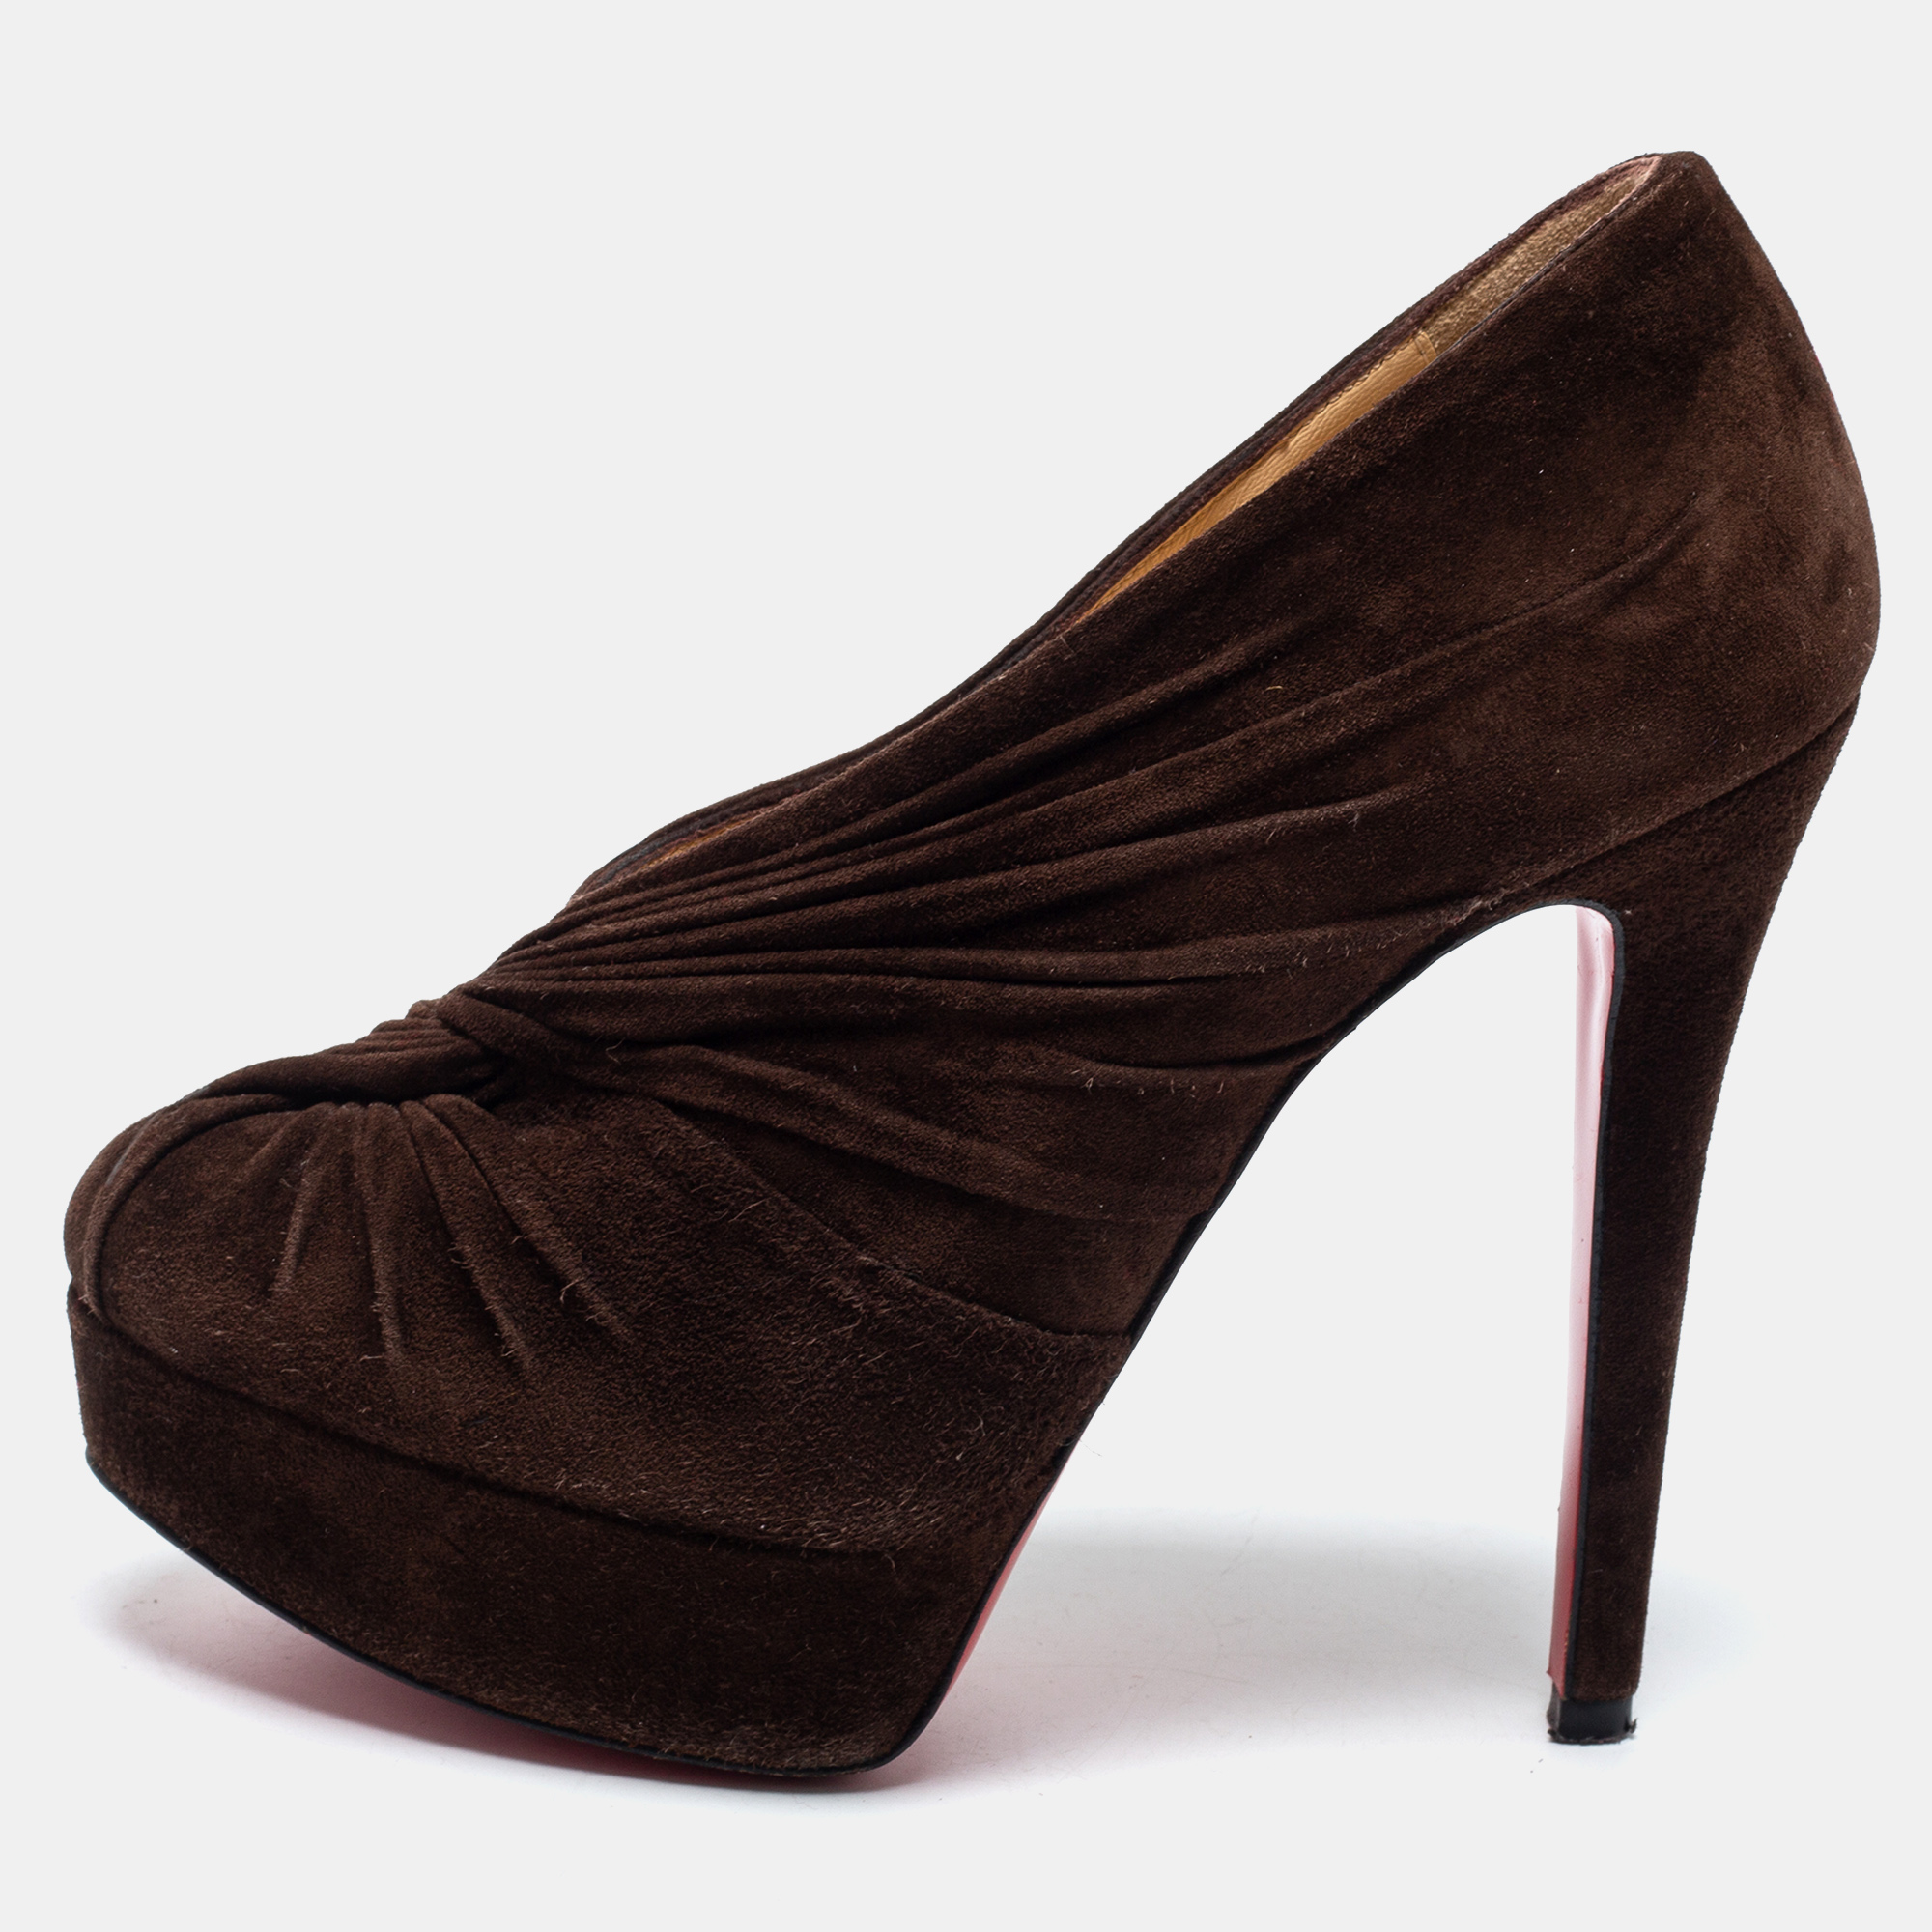 Pre-owned Christian Louboutin Brown Pleated Suede Platform Ankle Booties Size 35.5